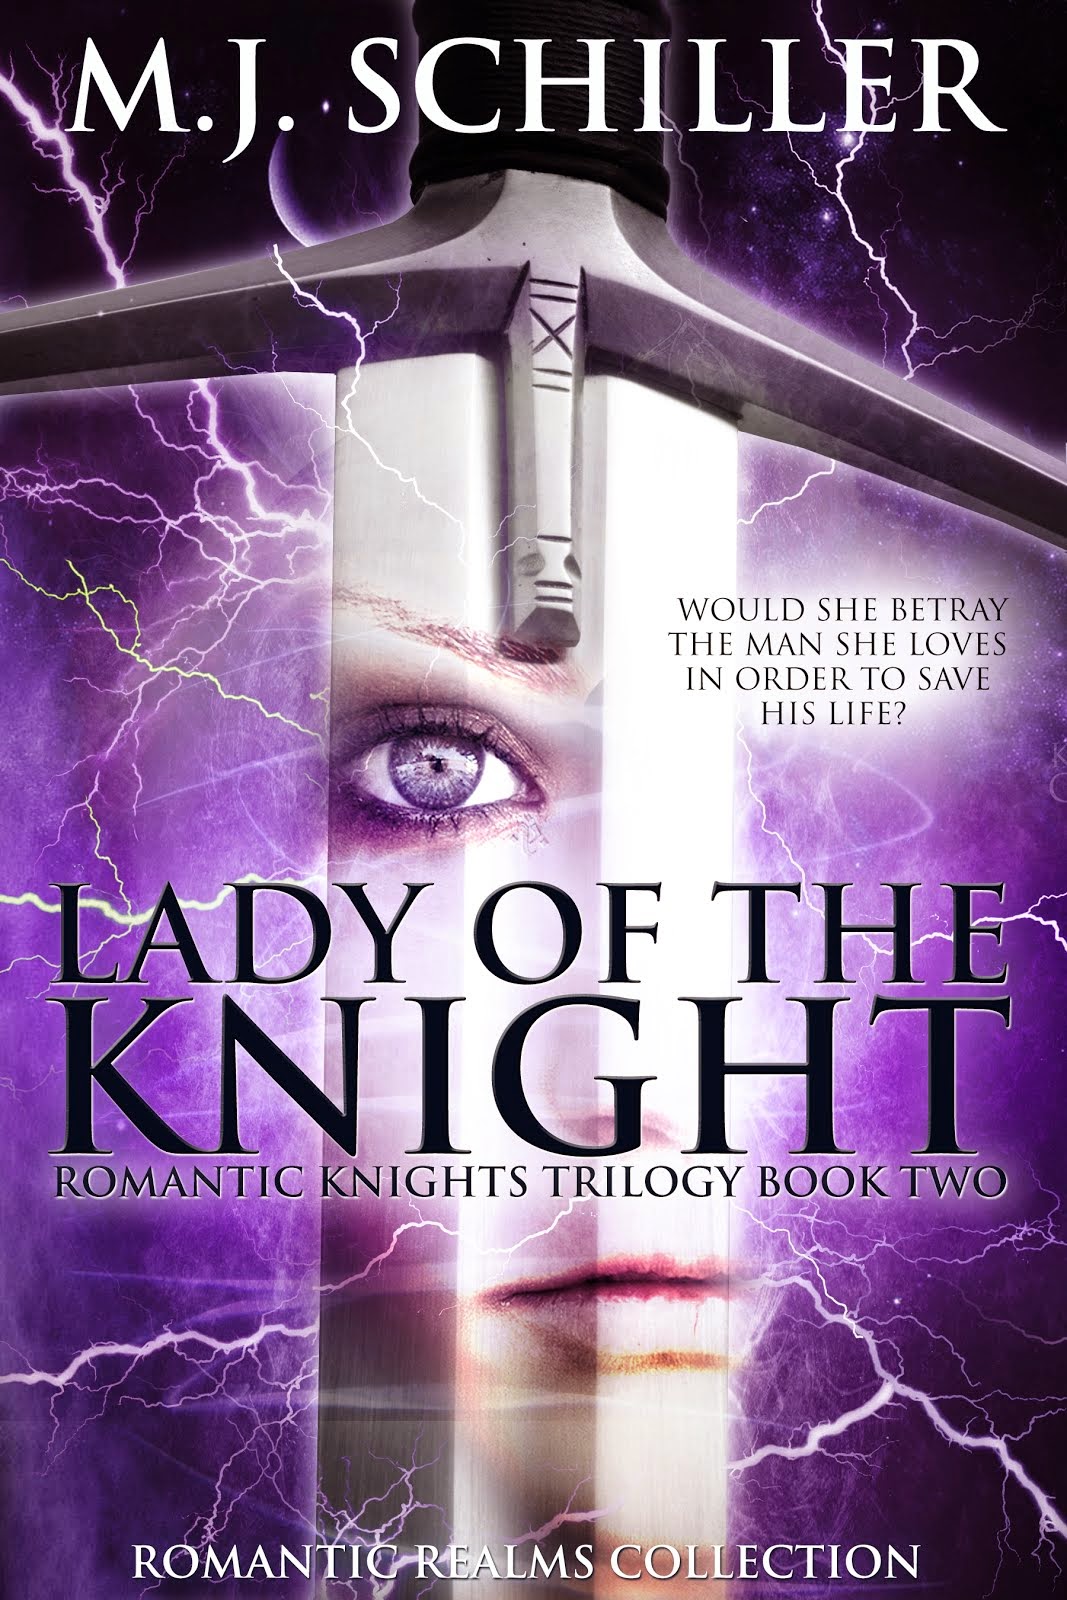 LADY OF THE KNIGHT